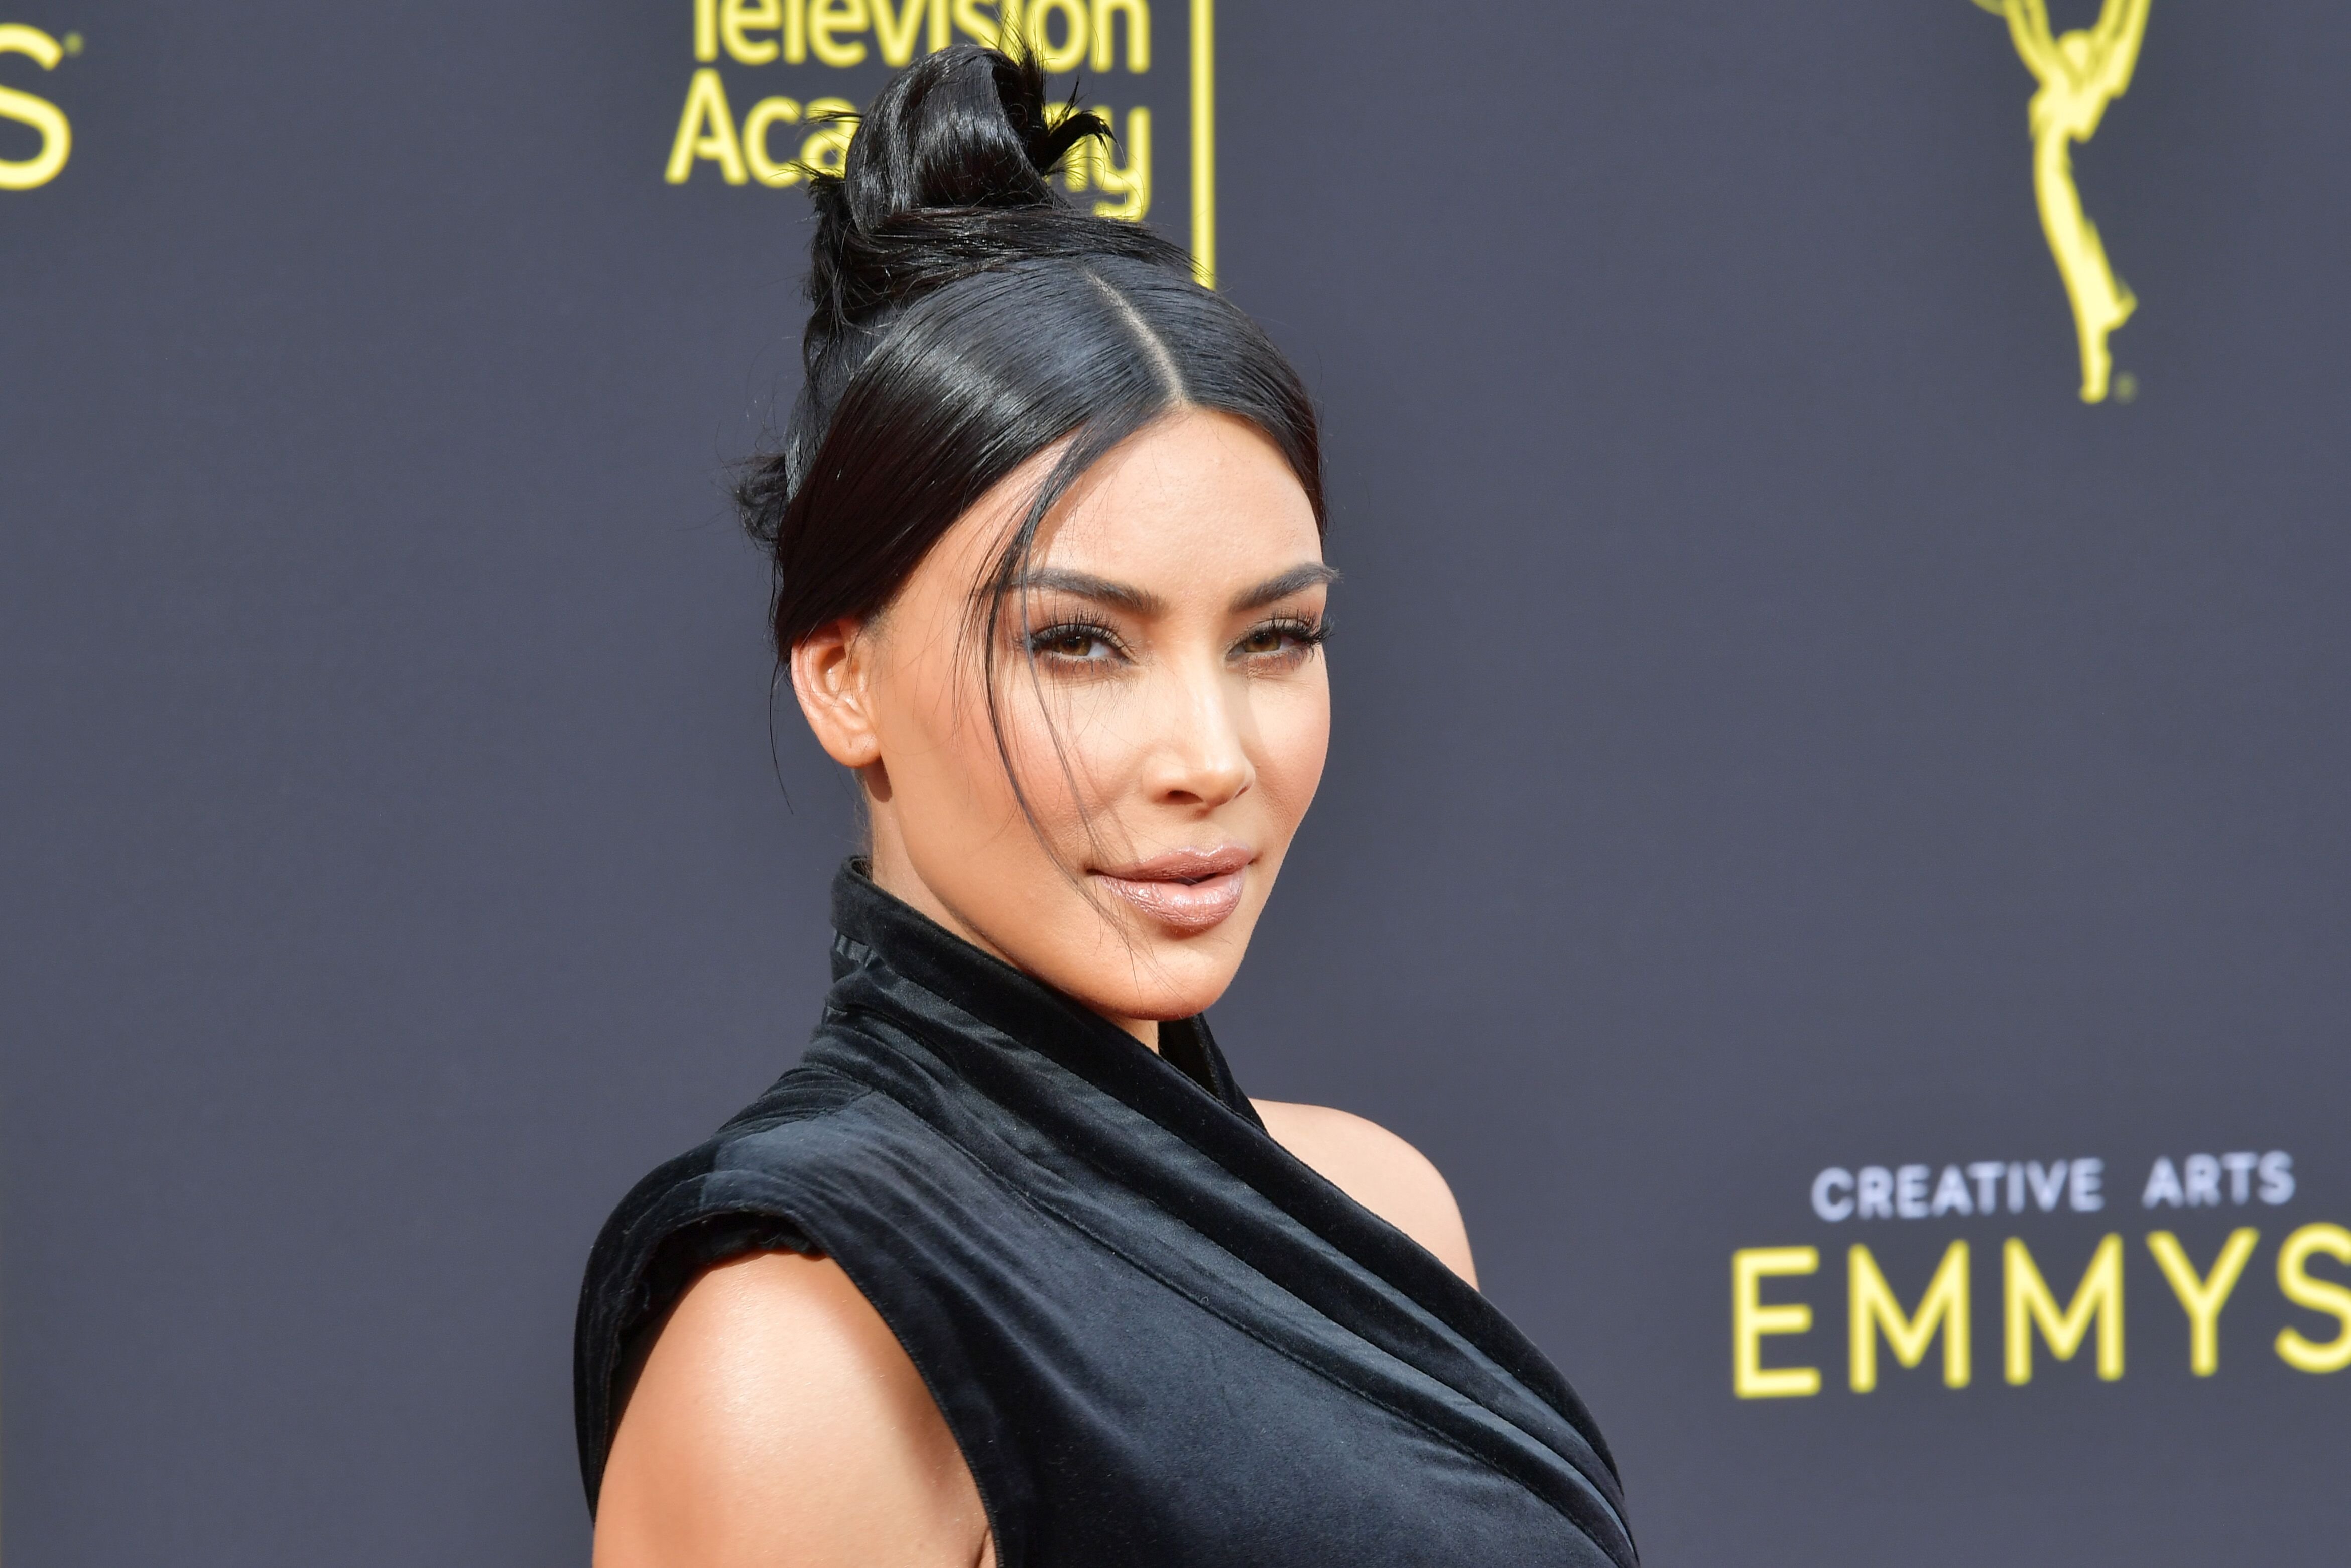 Kim Kardashian at the Creative Arts Emmy Awards on September 14, 2019, in Los Angeles, California | Photo: Amy Sussman/Getty Images